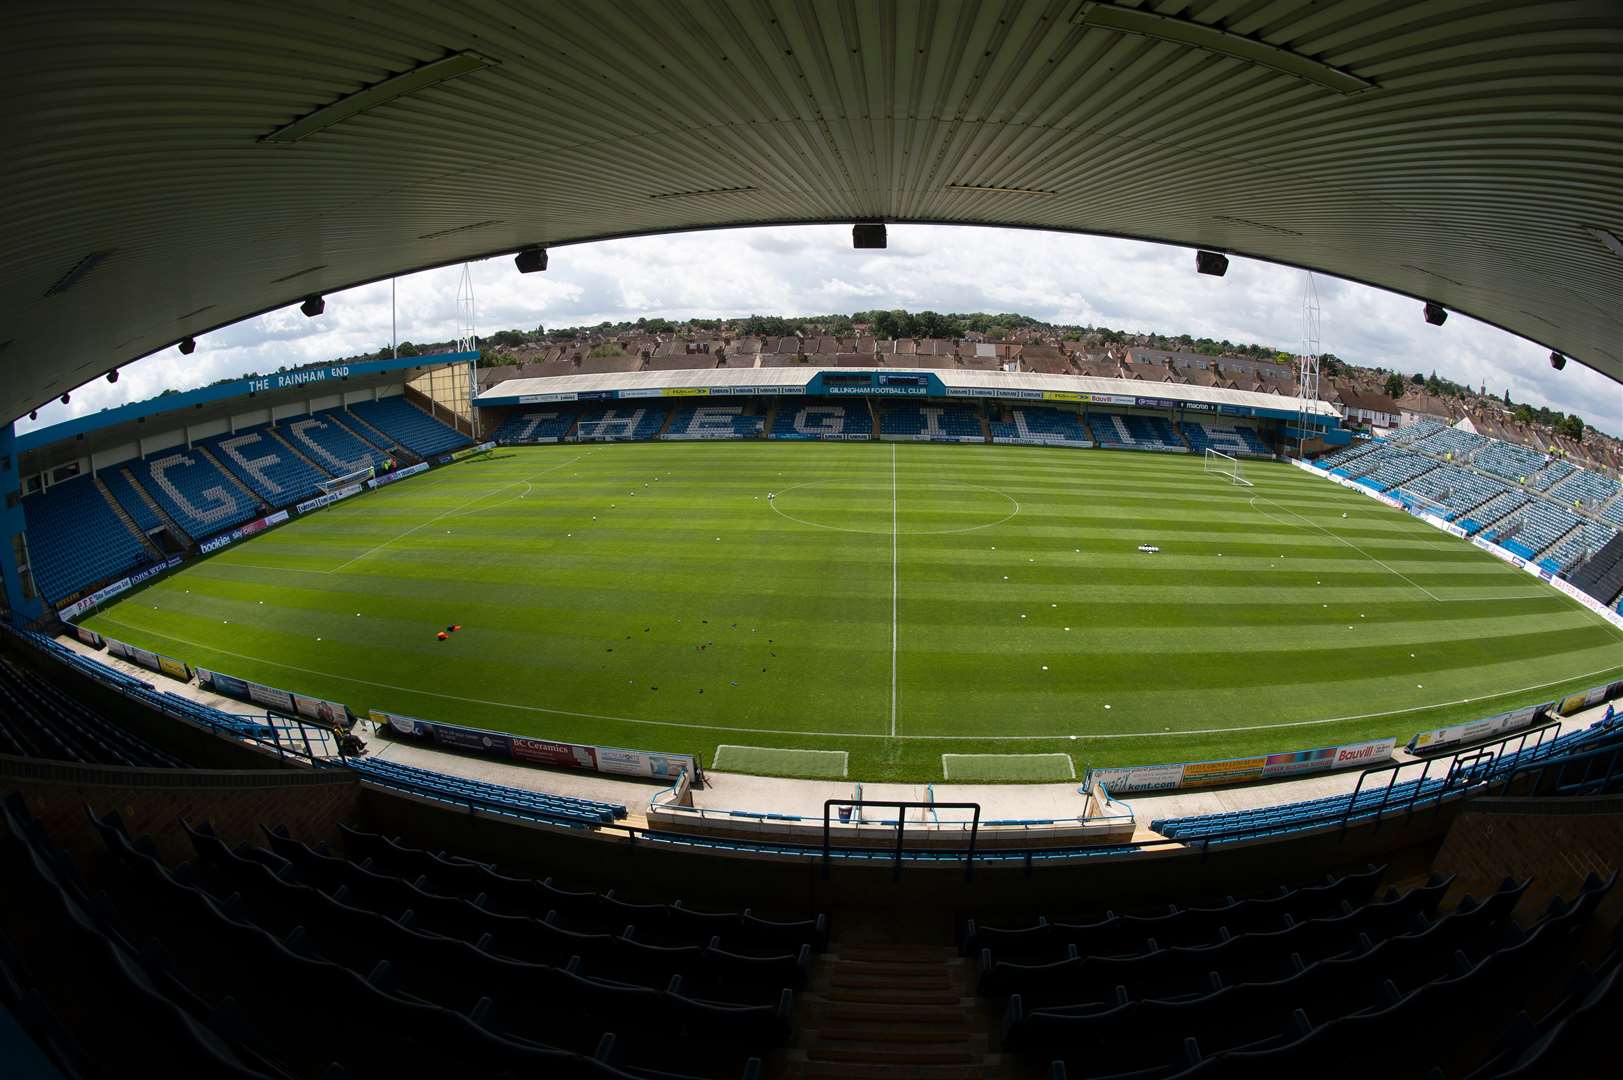 No professional football has been played at Priestfield Stadium since February